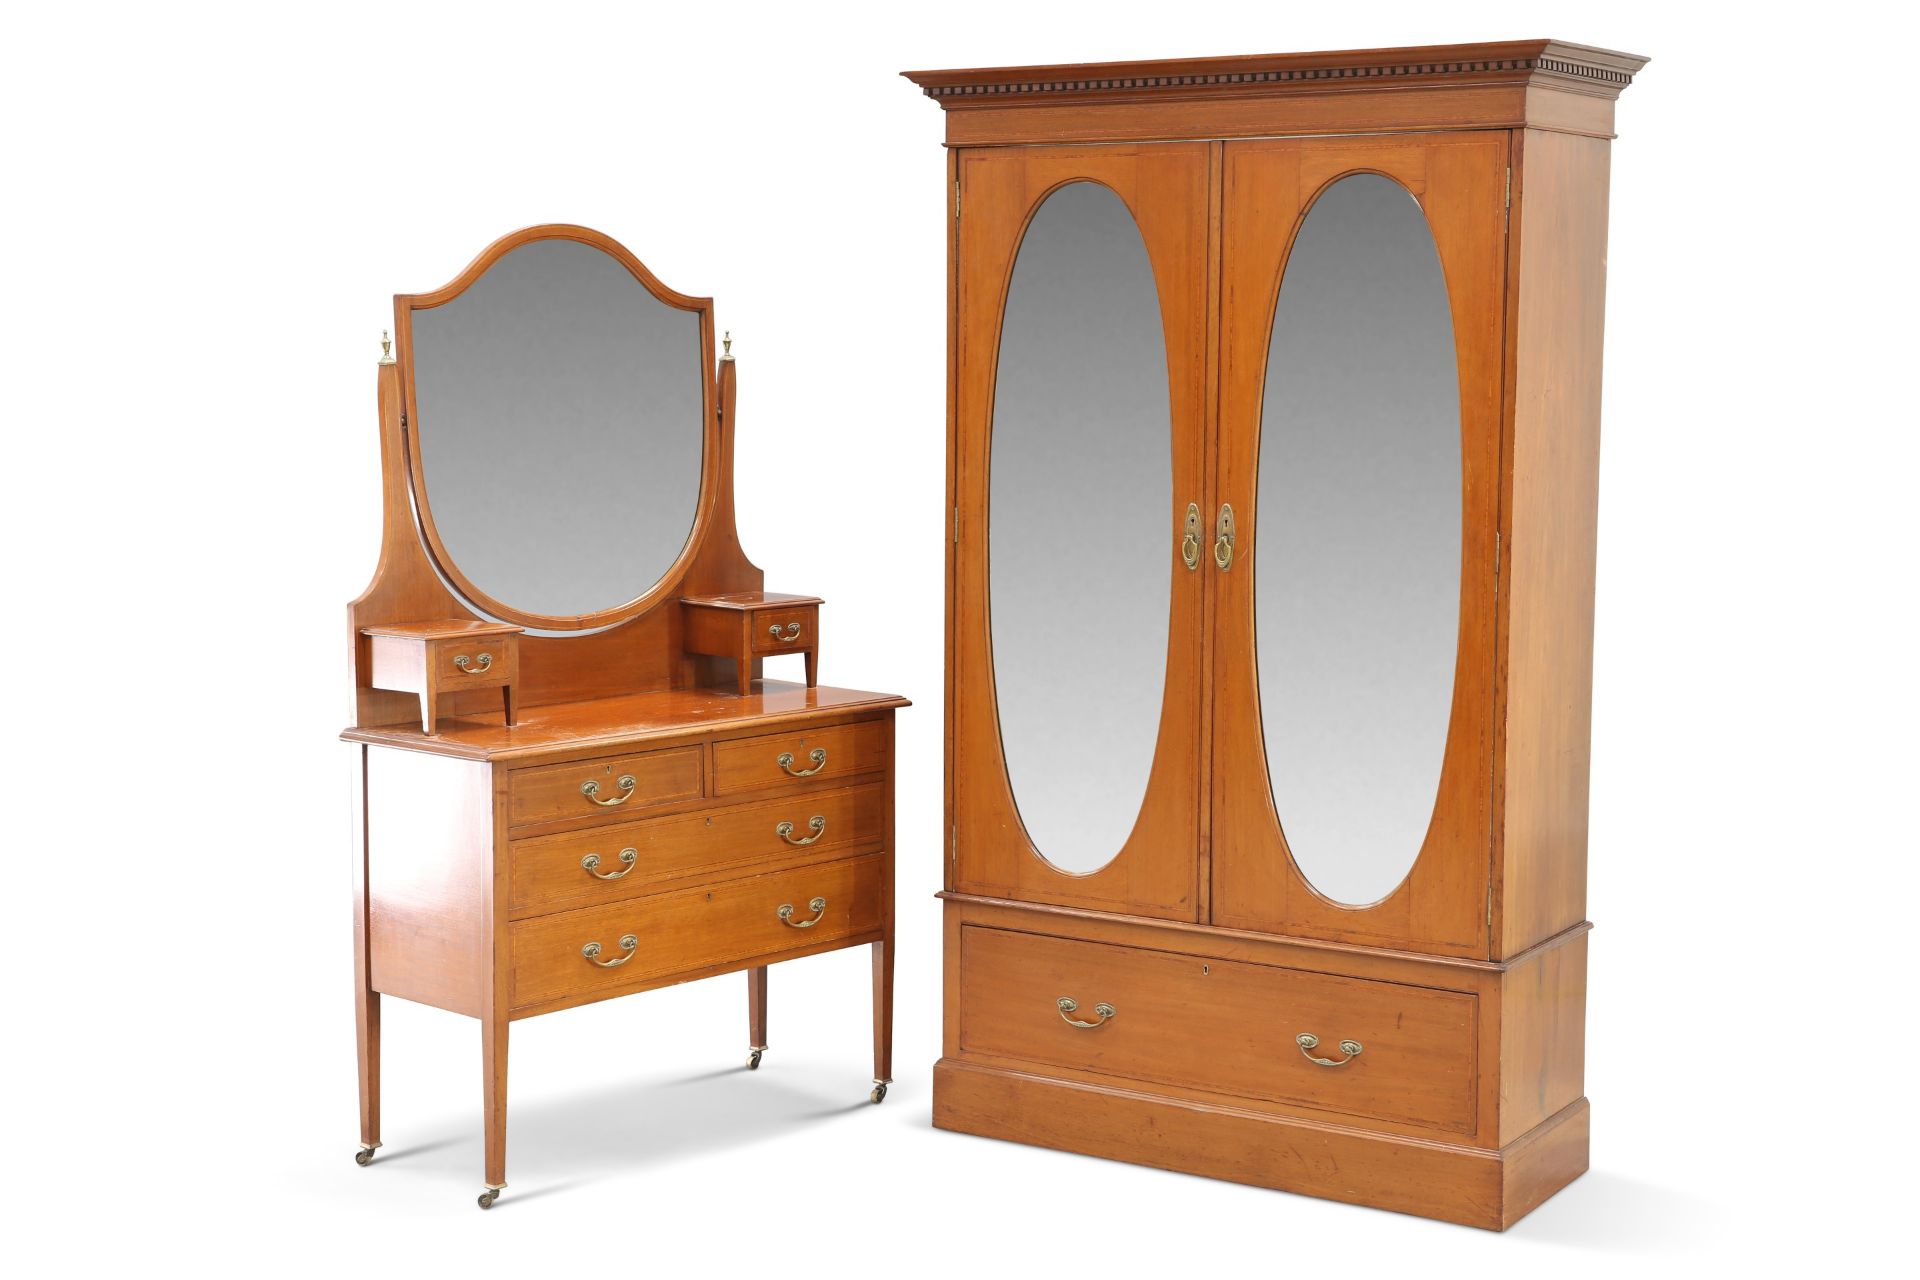 An Edwardian satinwood inlaid mahogany two-door wardrobe and dressing chest, the wardrobe with a